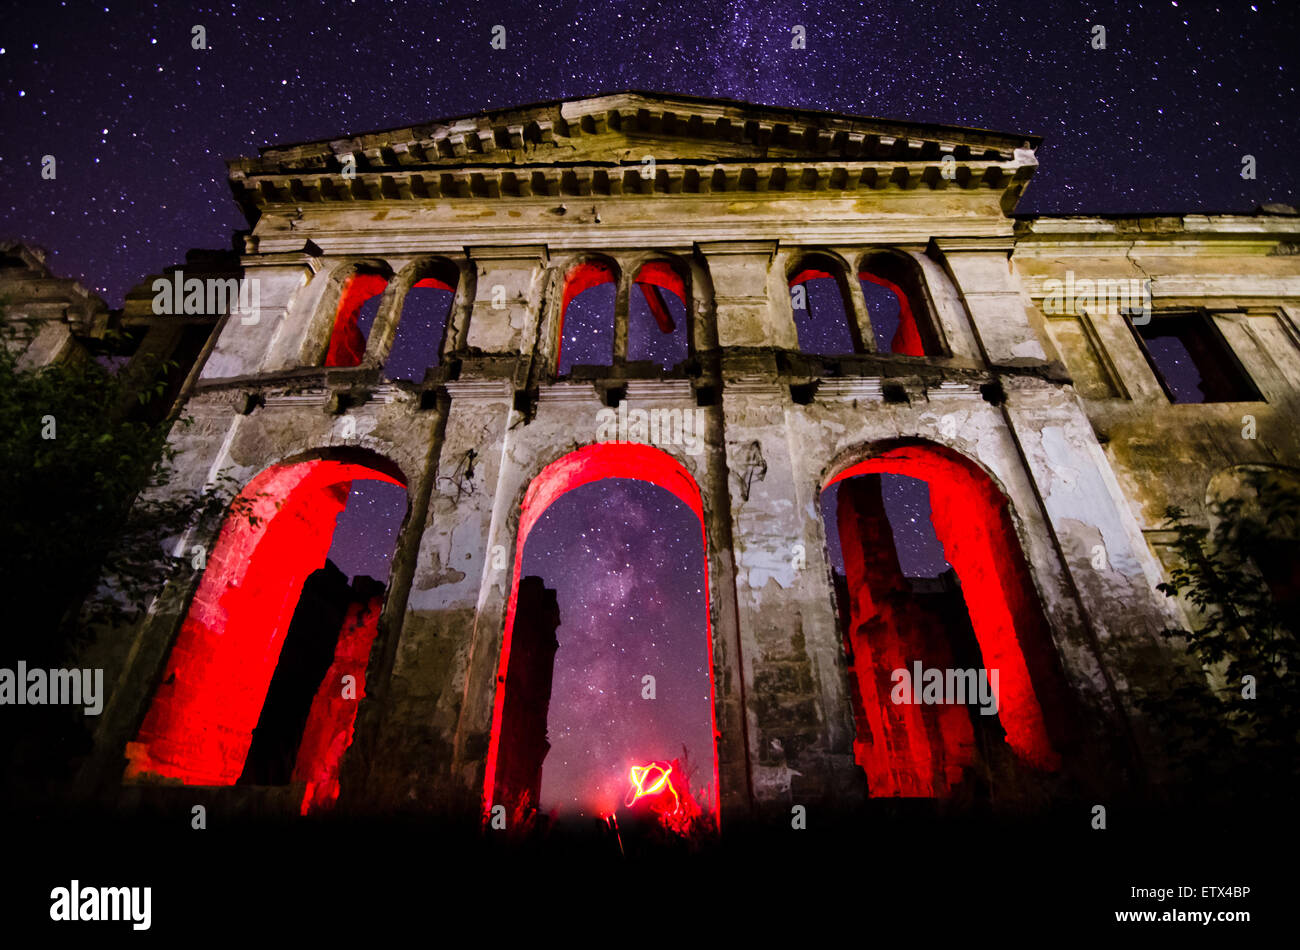 The night sky and the Milky Way, and highlighted the unusual red silhouette of the ruined walls of the old building Stock Photo